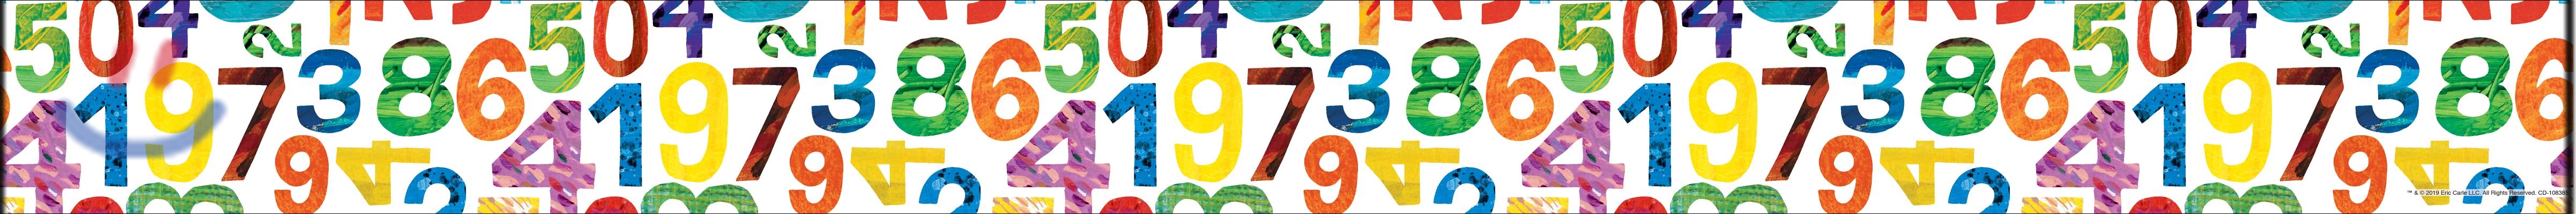 World of Eric Carle Numbers Straight Borders